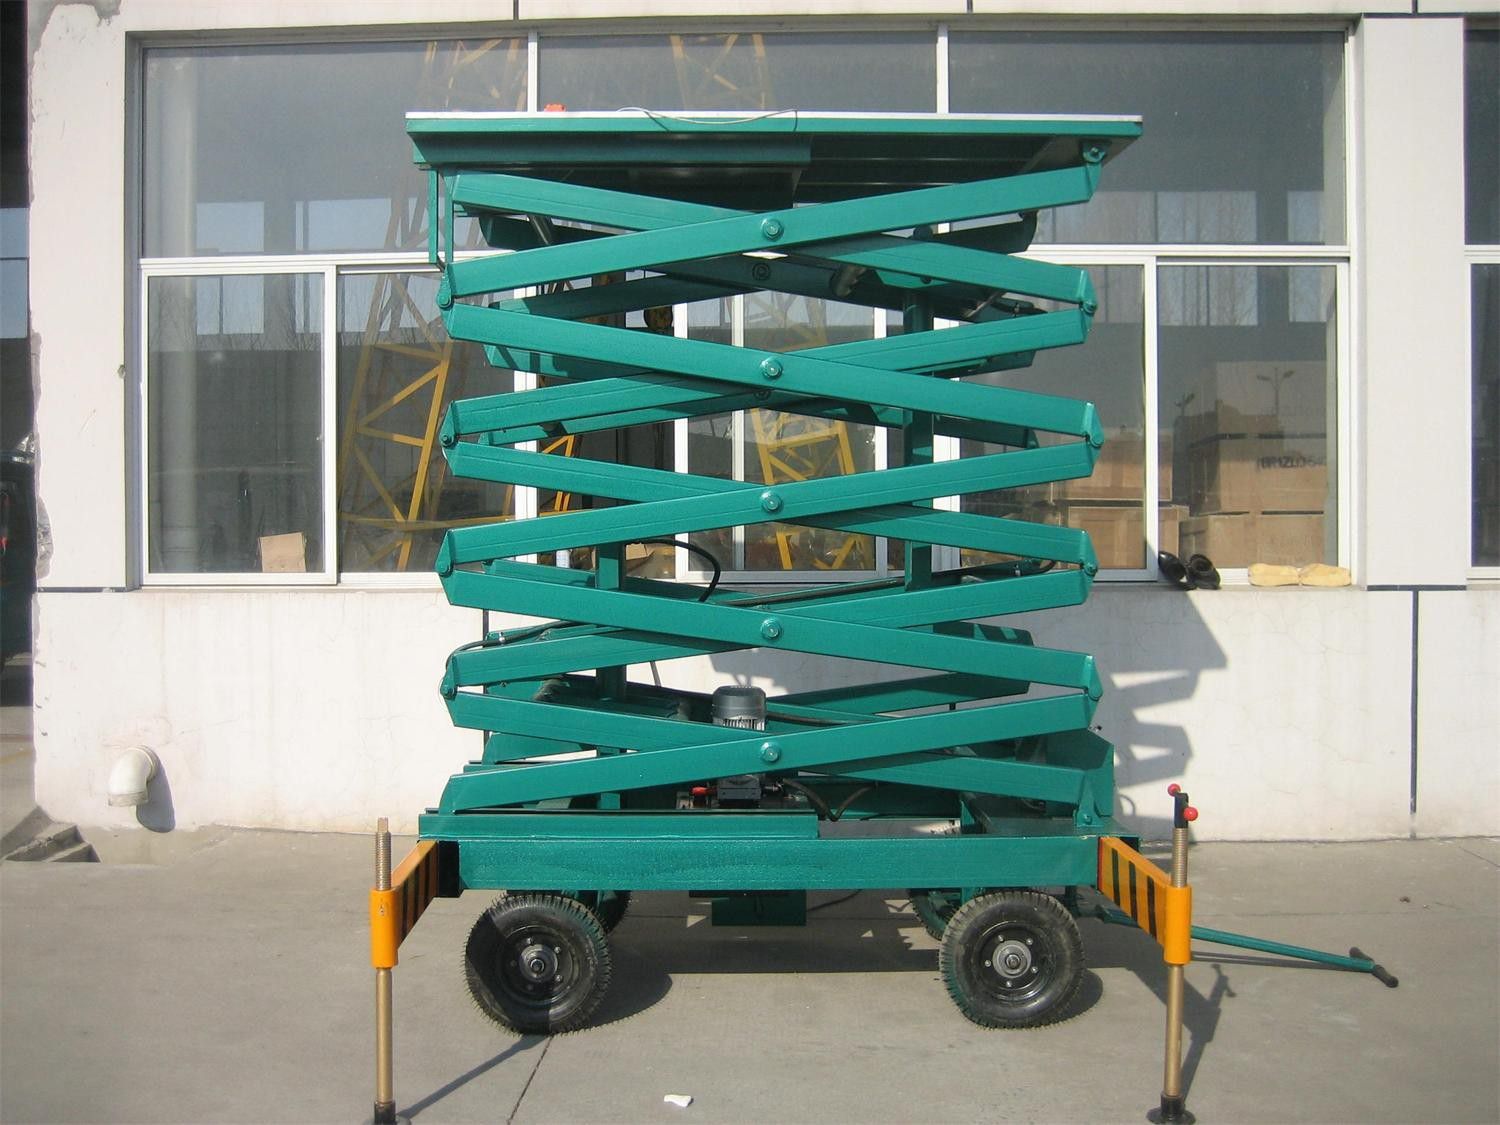 Ren QiuHydraulic lifting platform fixed typeWhat are the quality methods